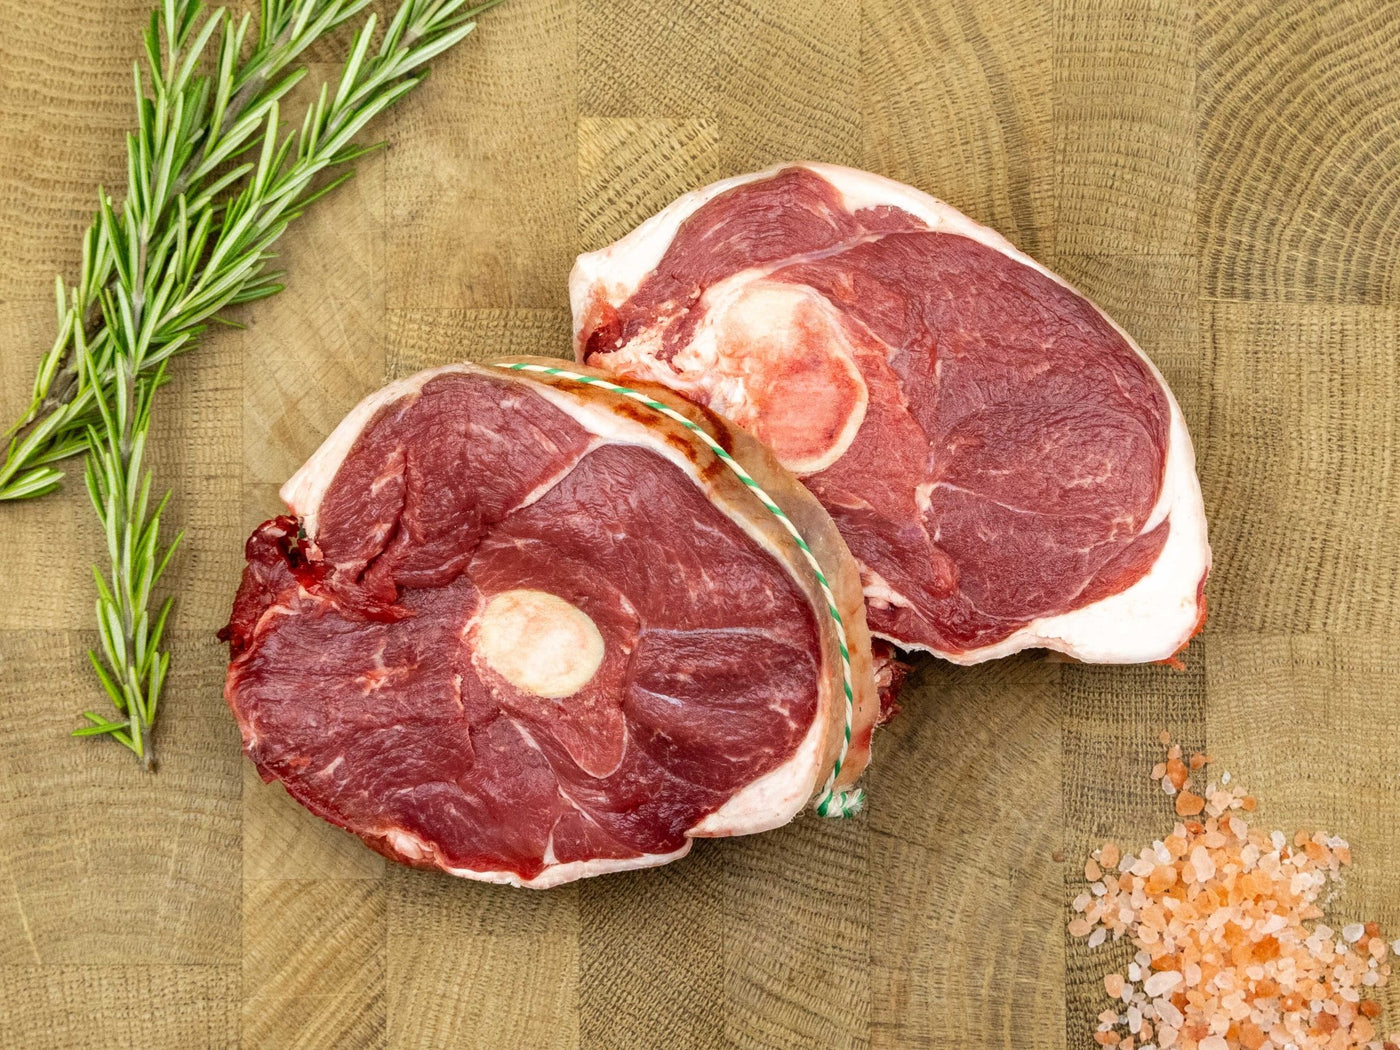 7 Day Dry-Aged, Grass Fed Lamb Leg Steaks - Lamb - Thomas Joseph Butchery - Ethical Dry-Aged Meat The Best Steak UK Thomas Joseph Butchery